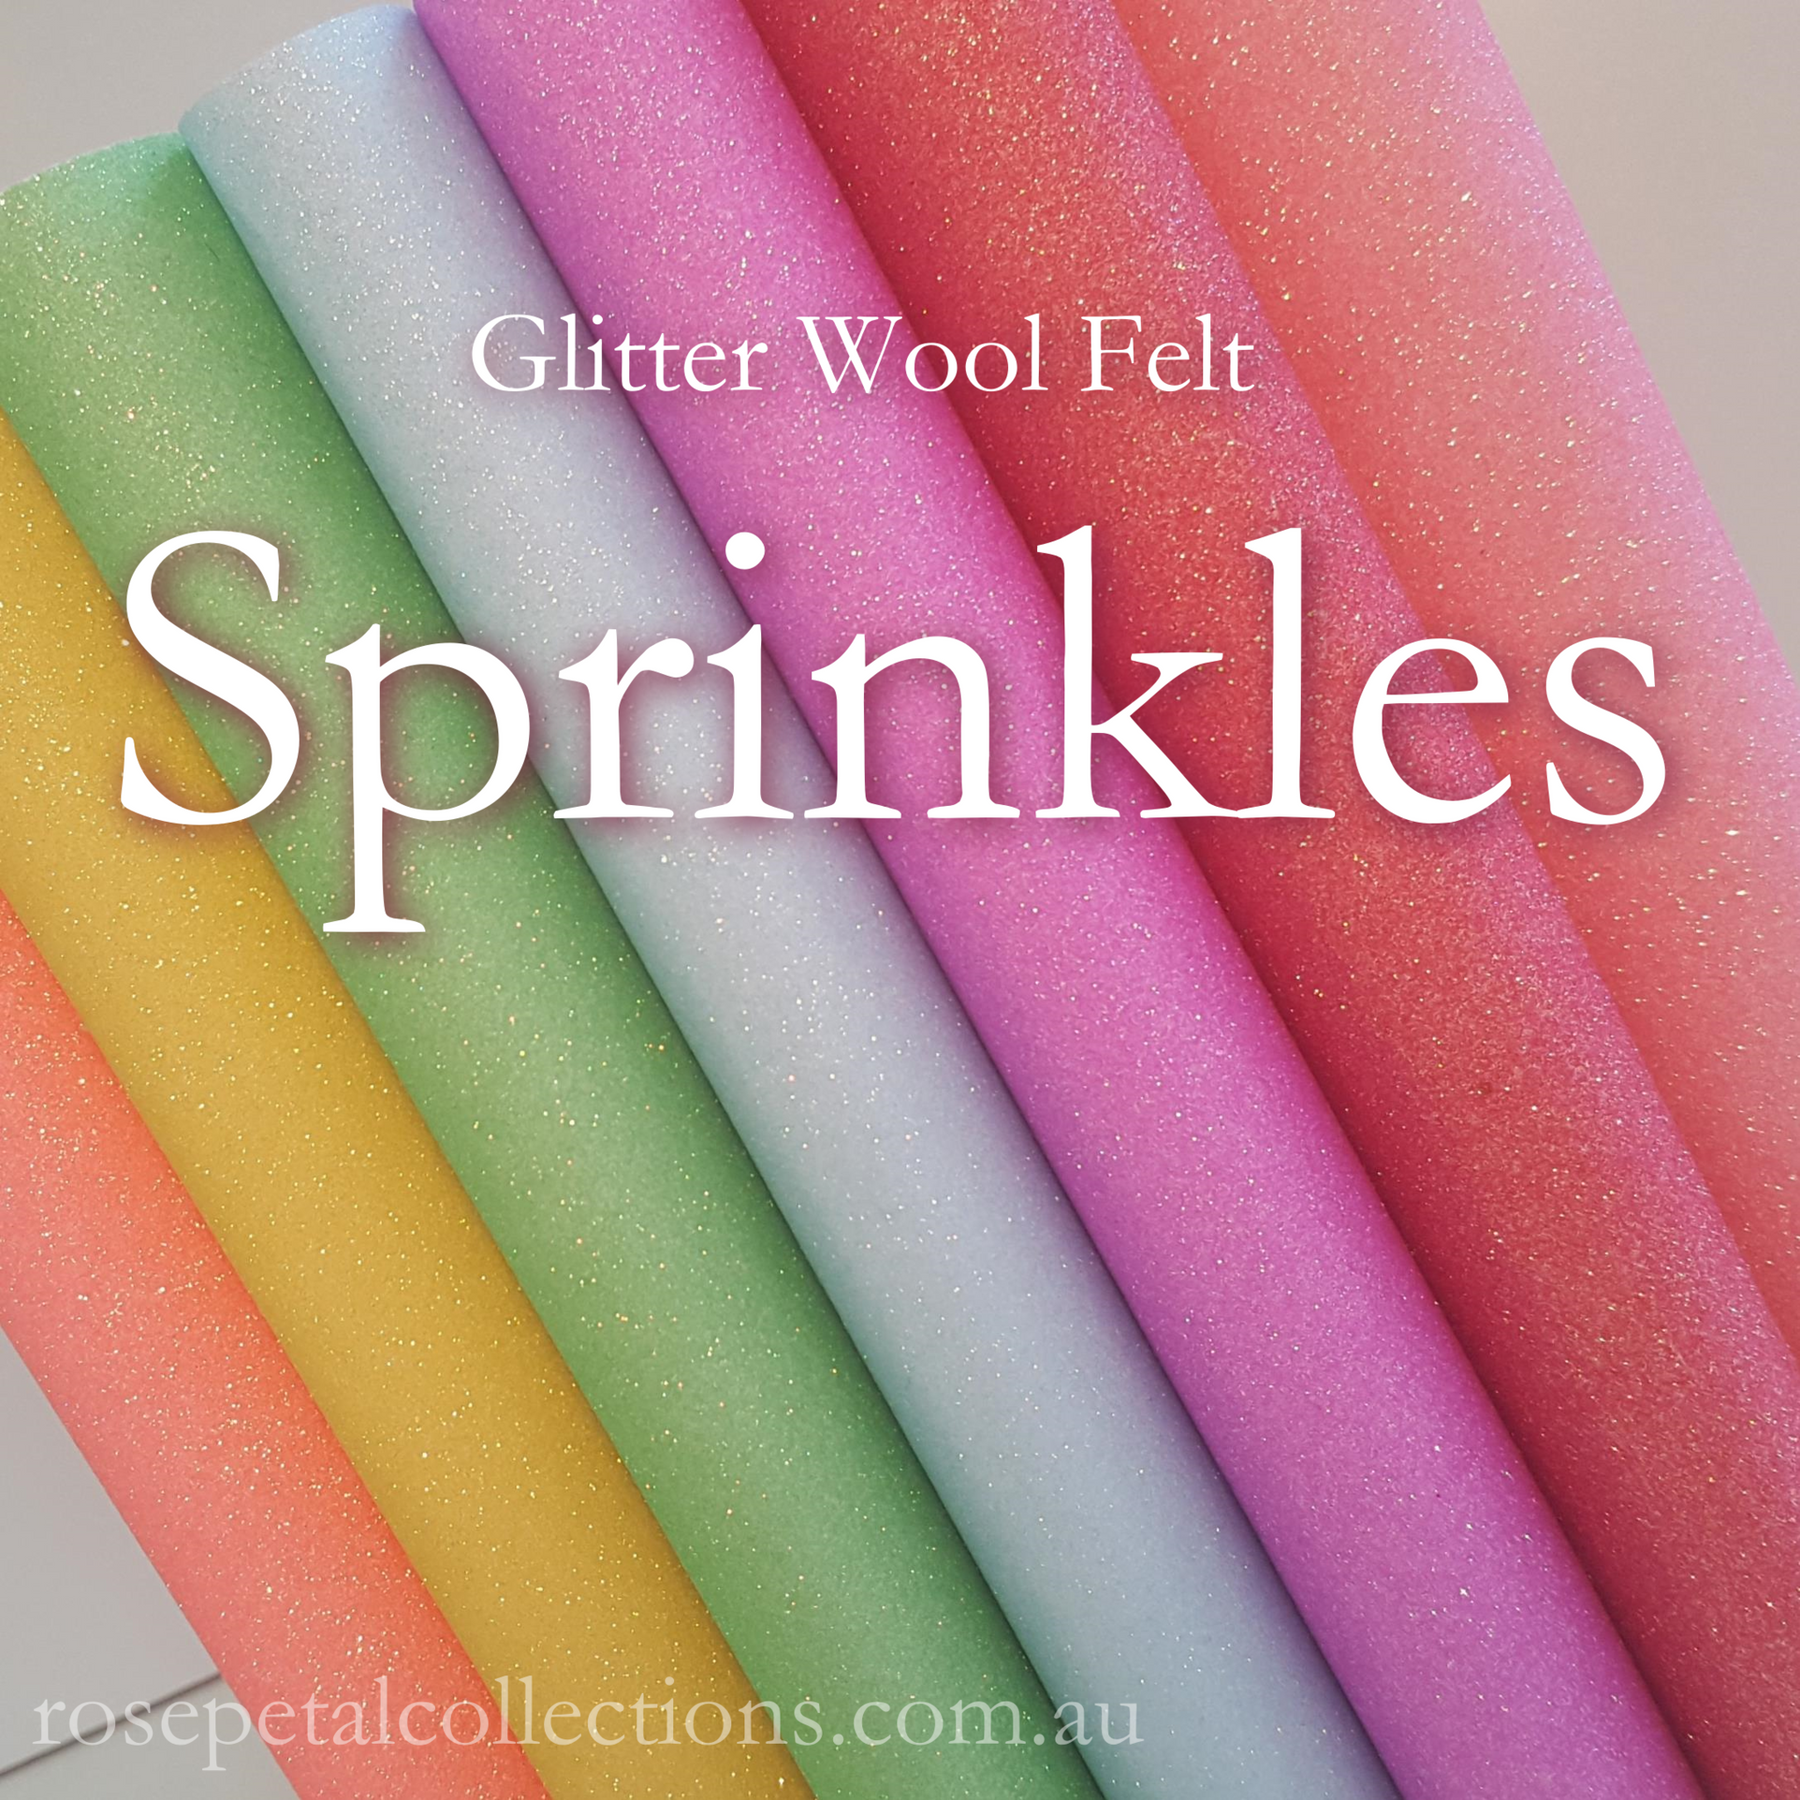 New Limited Edition Glitter Wool Felt Collection & a Free Tutorial from Molly & Mama